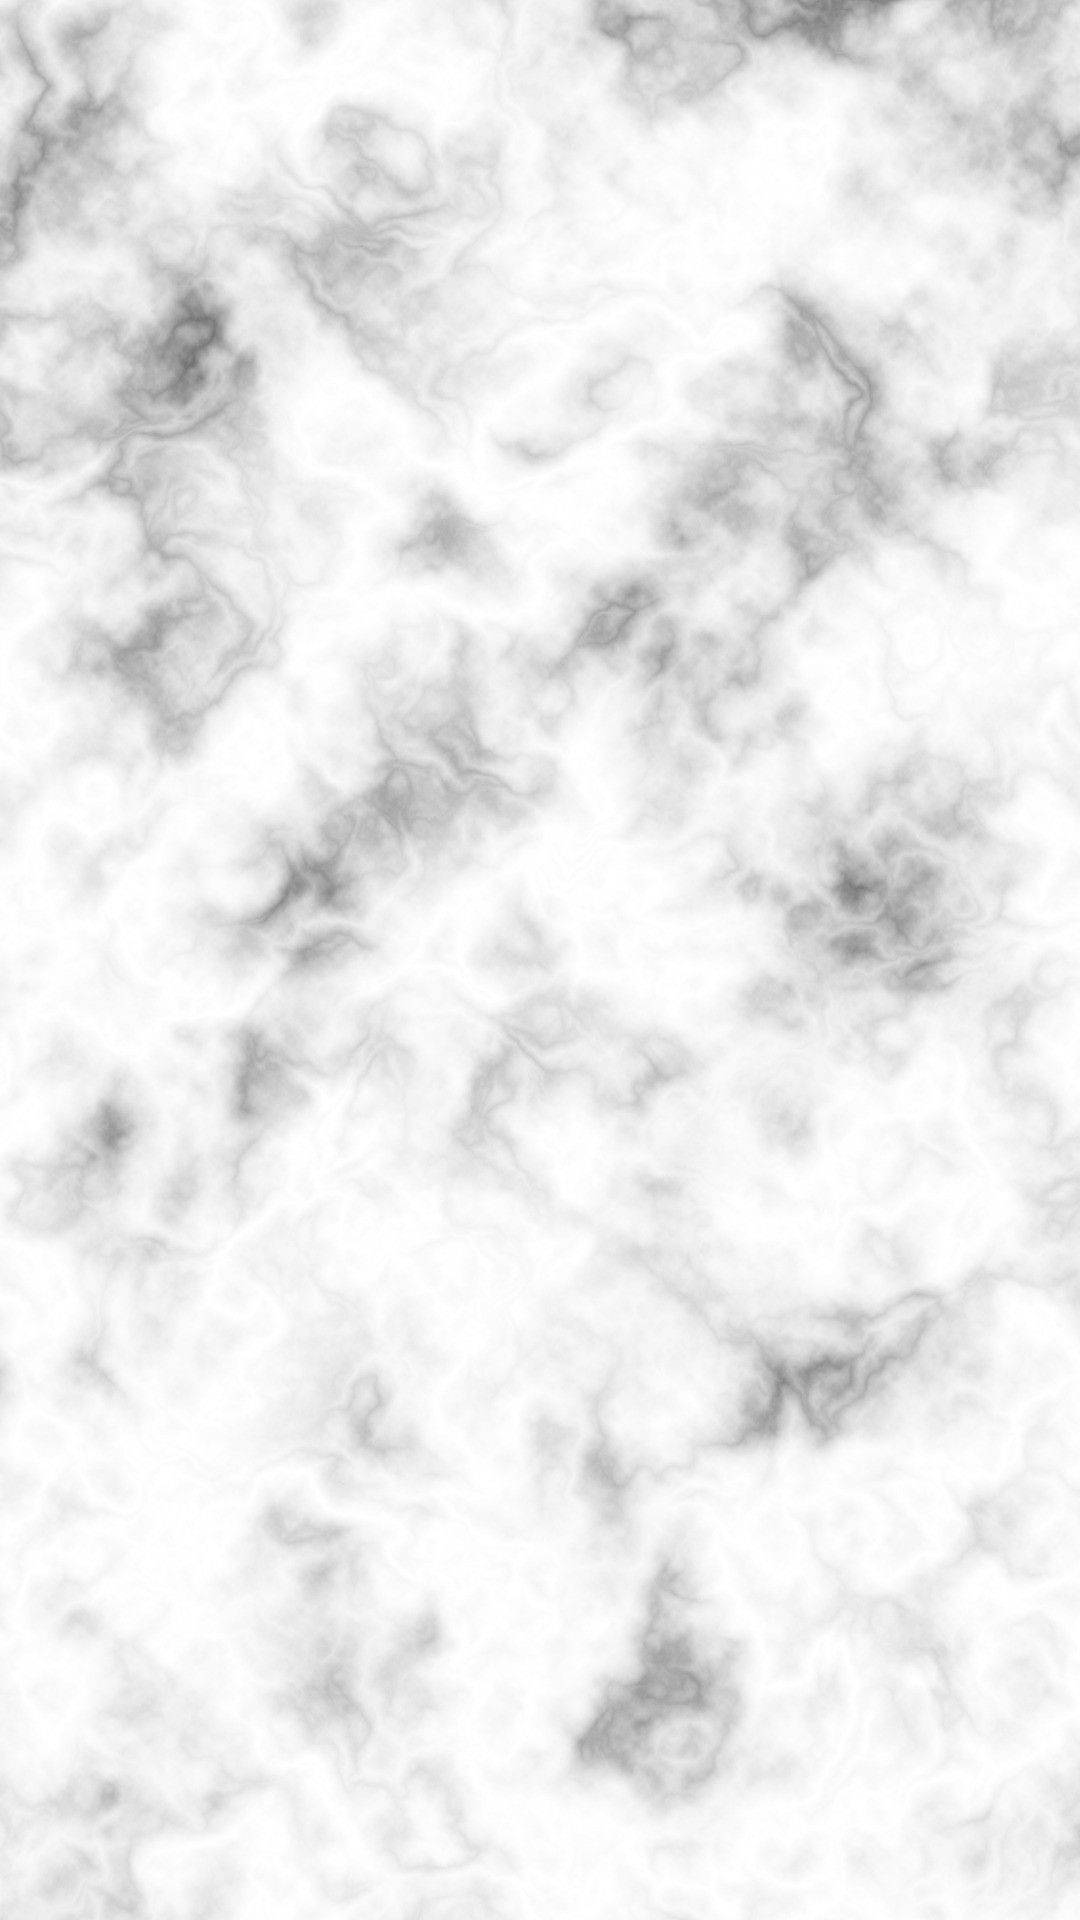 A White And Gray Marble Texture Wallpaper